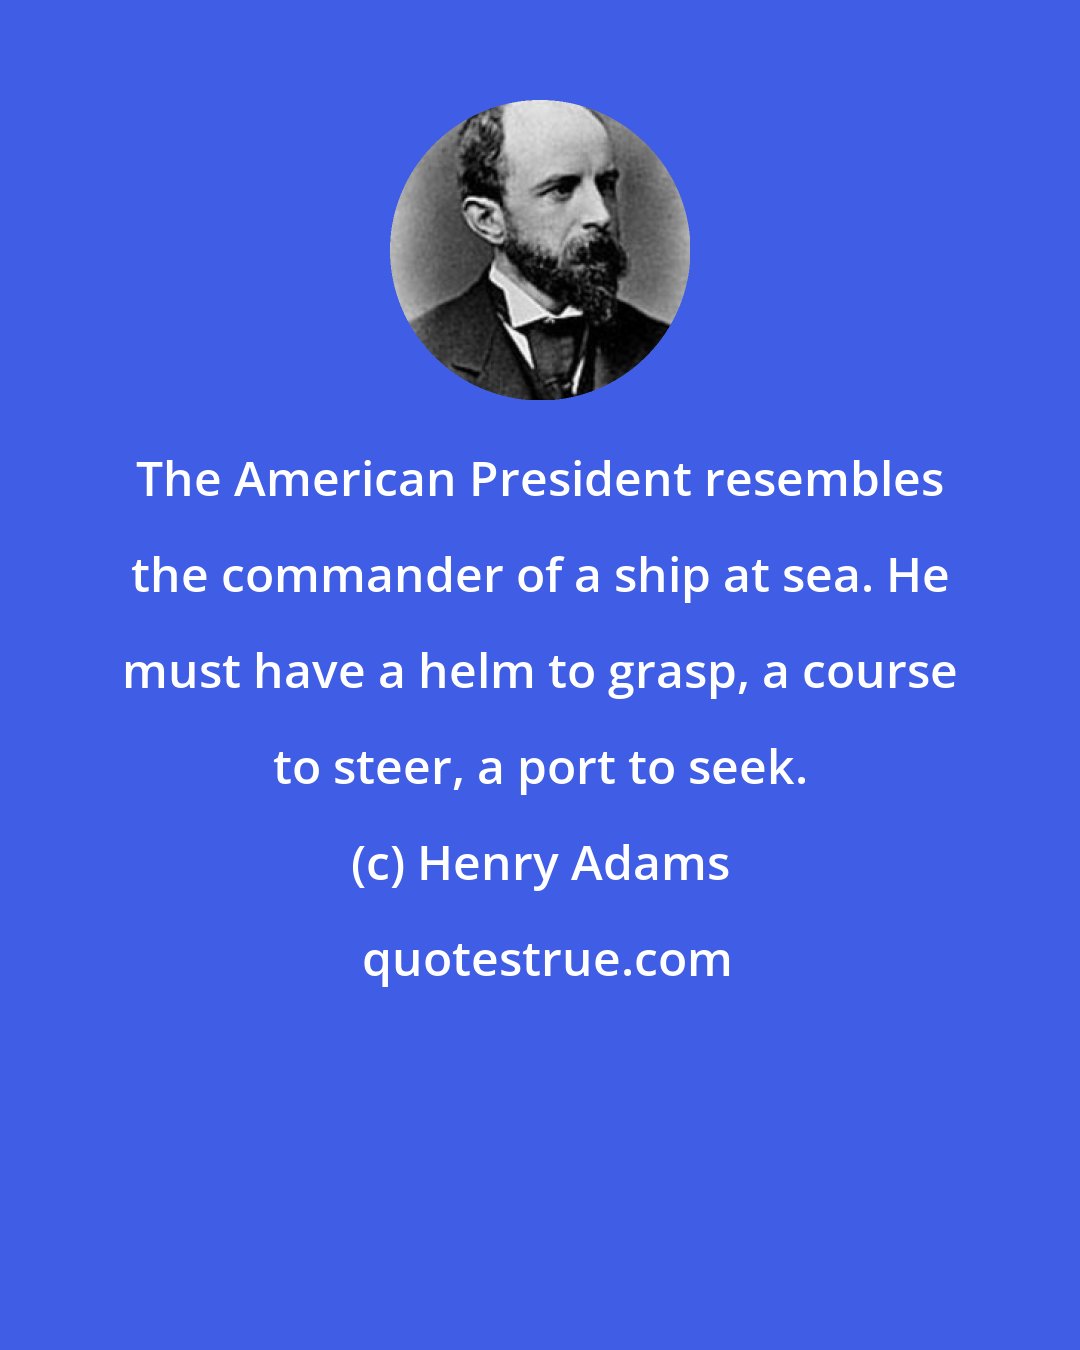 Henry Adams: The American President resembles the commander of a ship at sea. He must have a helm to grasp, a course to steer, a port to seek.